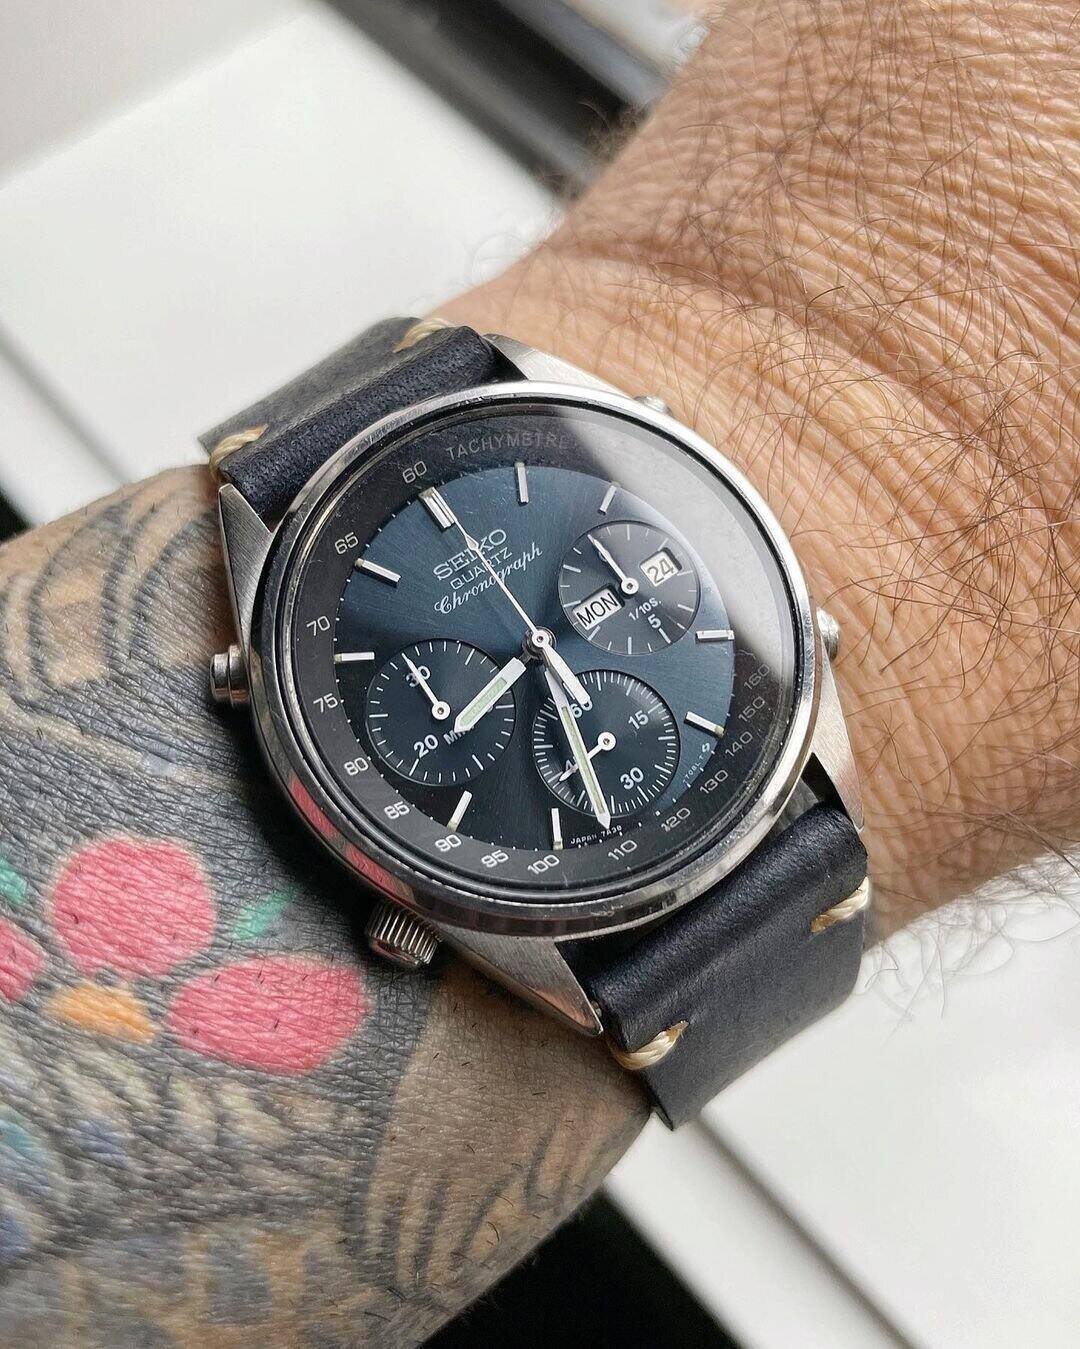 rsz_7a38-706a-stainless-darkblueface-wrongtachymeter-leatherstrap-instagram-aus_seiko_collector-wristshot-mon24.jpg